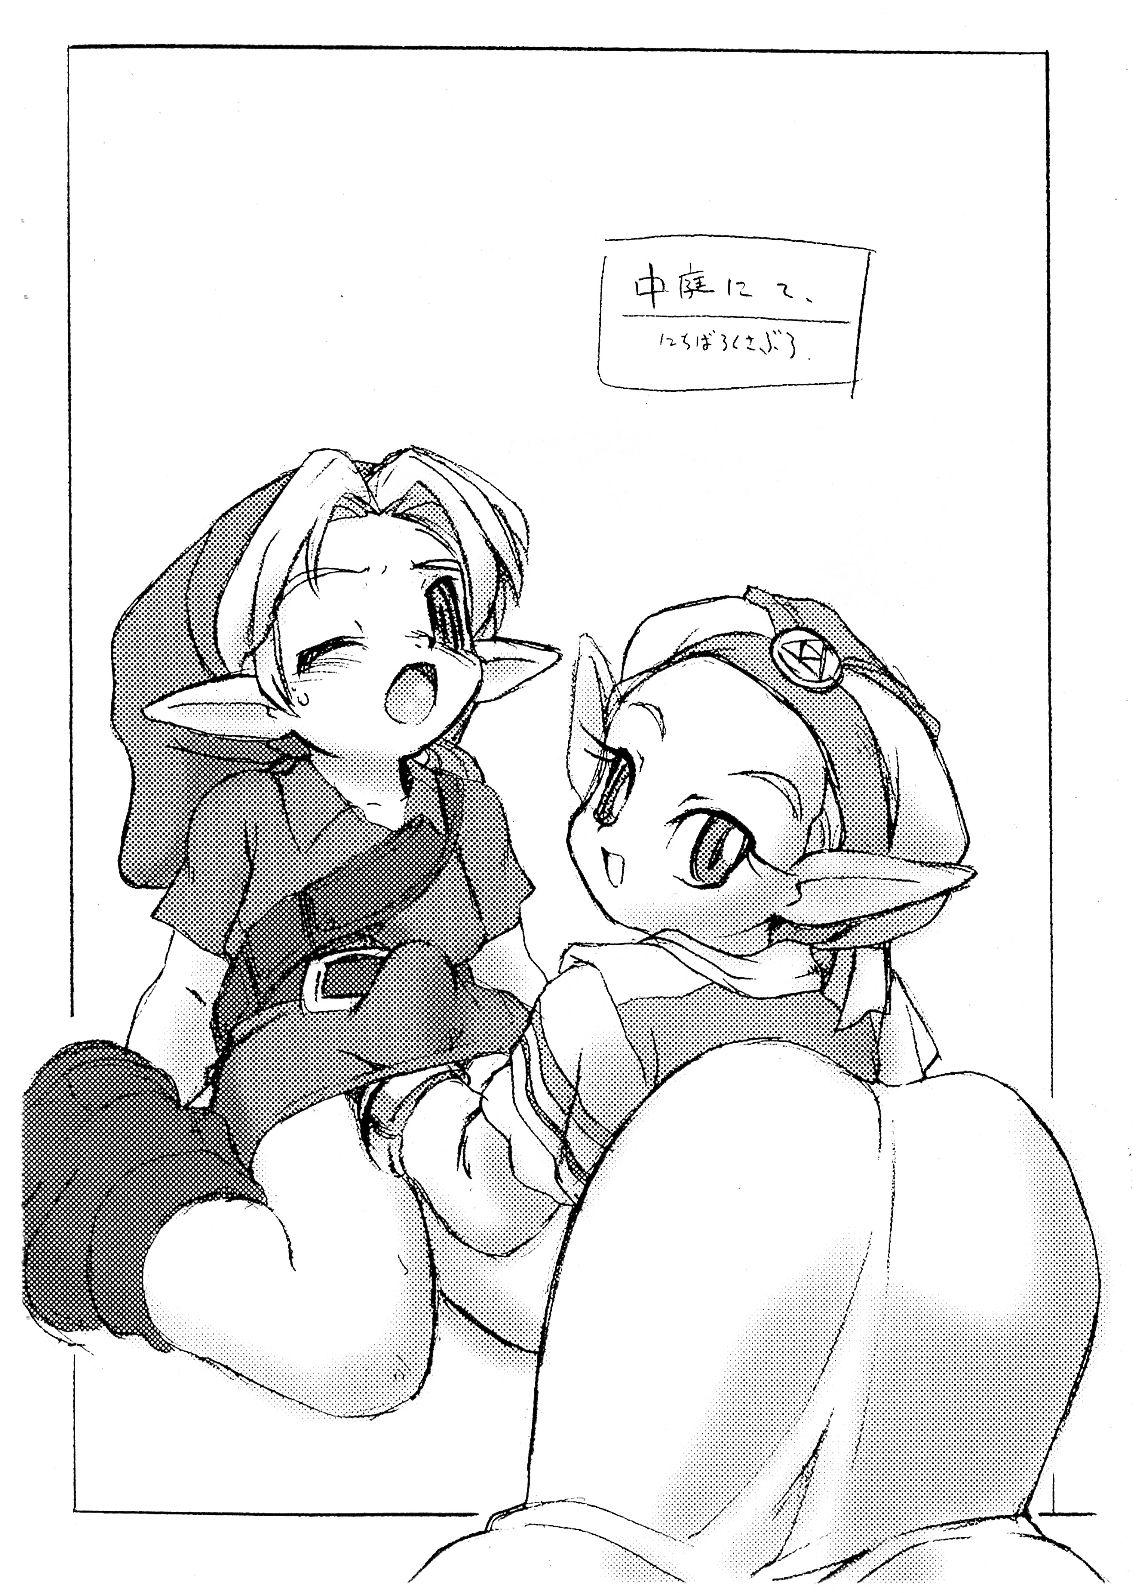 Awesome TOUCH DASH! + Omake - The legend of zelda Bakusou kyoudai lets and go Vadia - Page 7